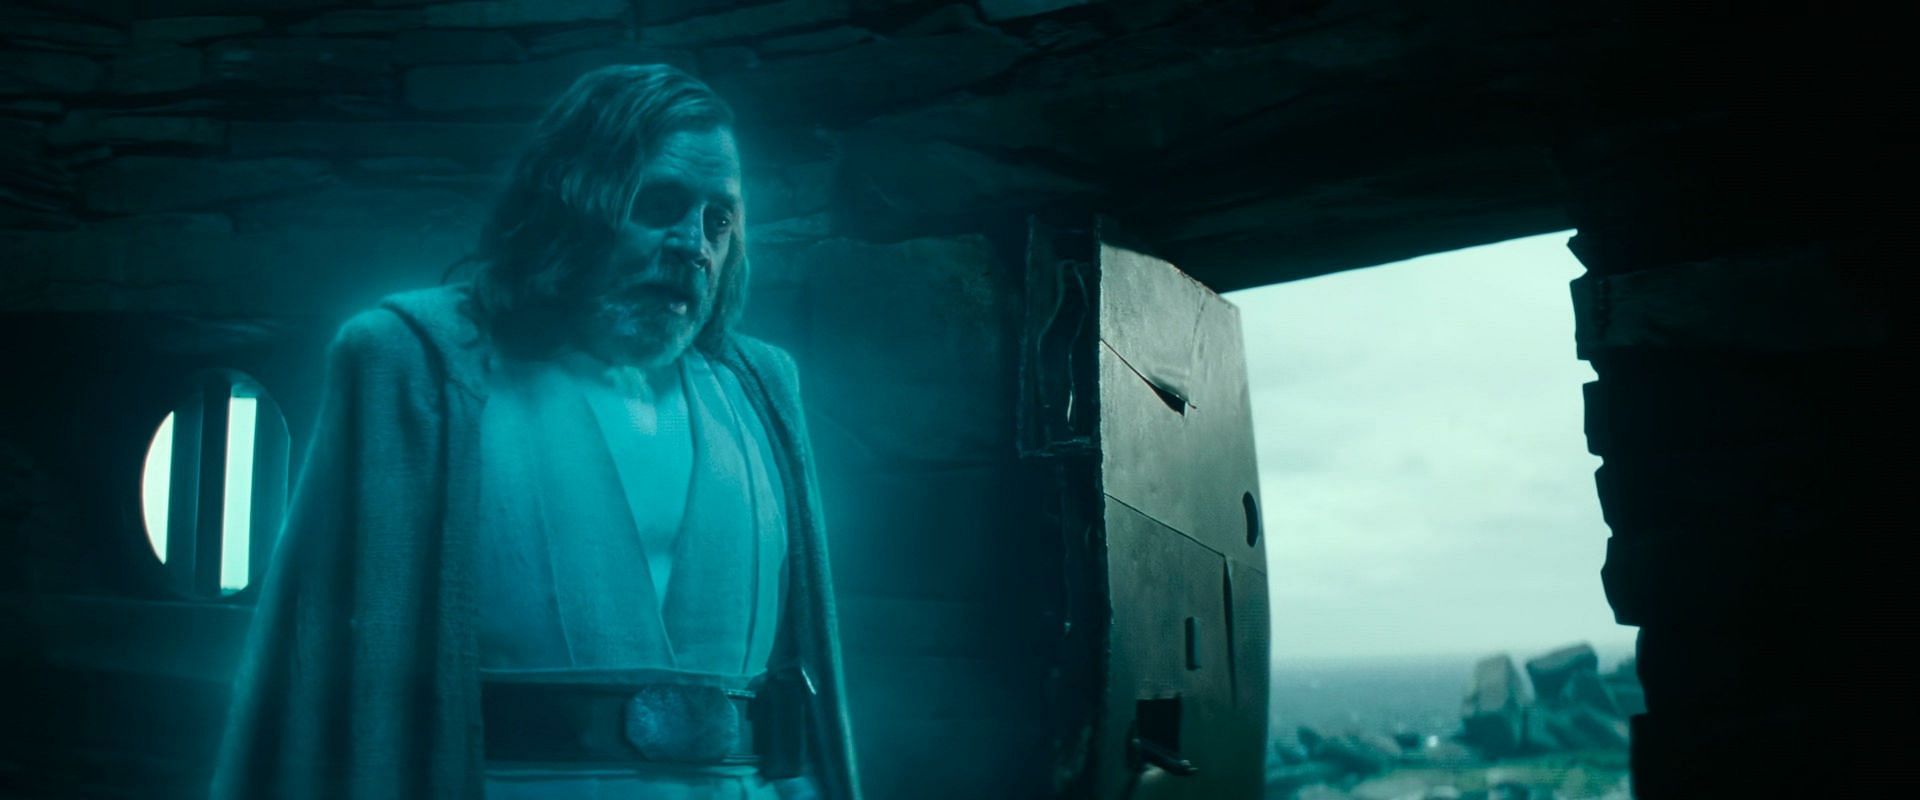 Rey is embracing the legacy of Luke Skywalker to forge a New Jedi Order, Lucasfilm president confirms (Image via Lucasfilm)